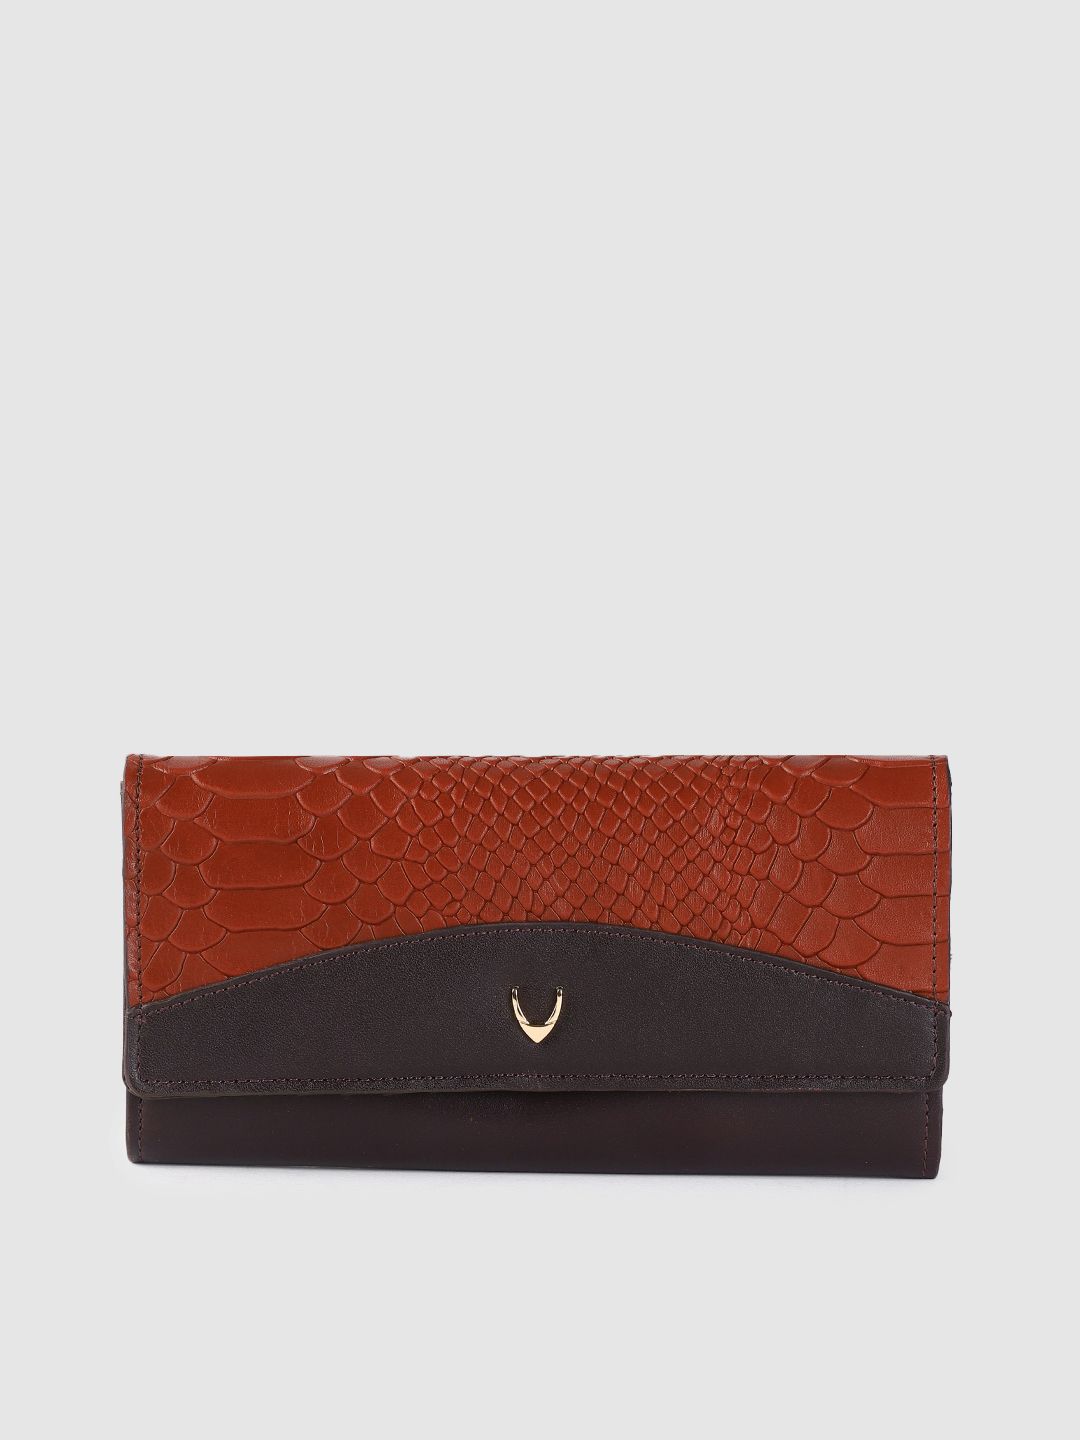 Hidesign Women Red & Brown Textured Leather Three Fold Wallet Price in India